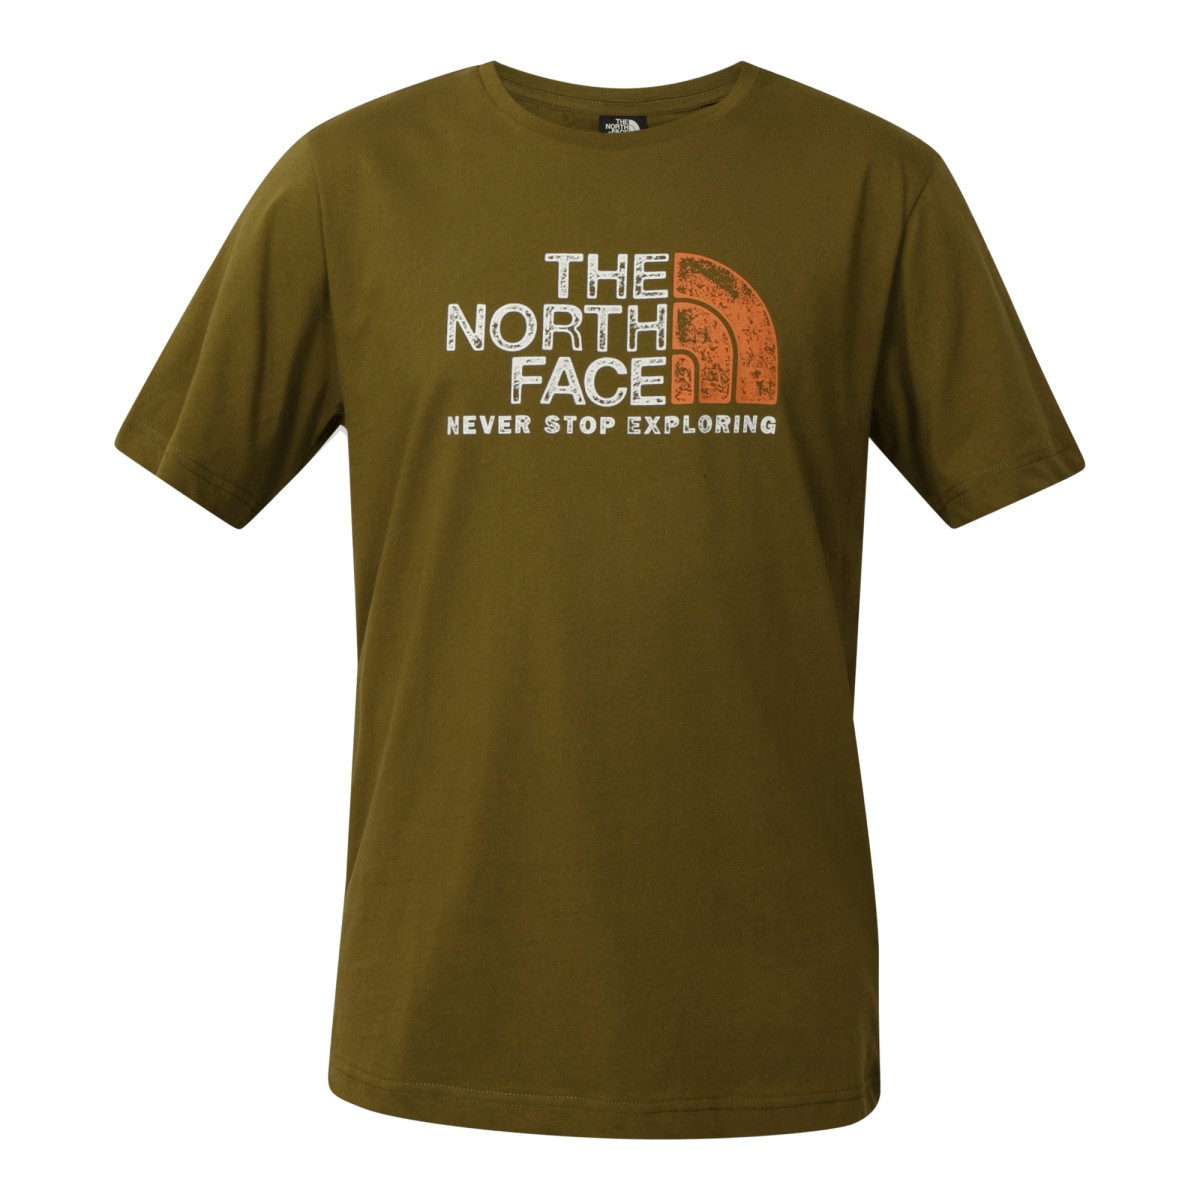 The North Face S/S RUST 2 TEE Λαδί